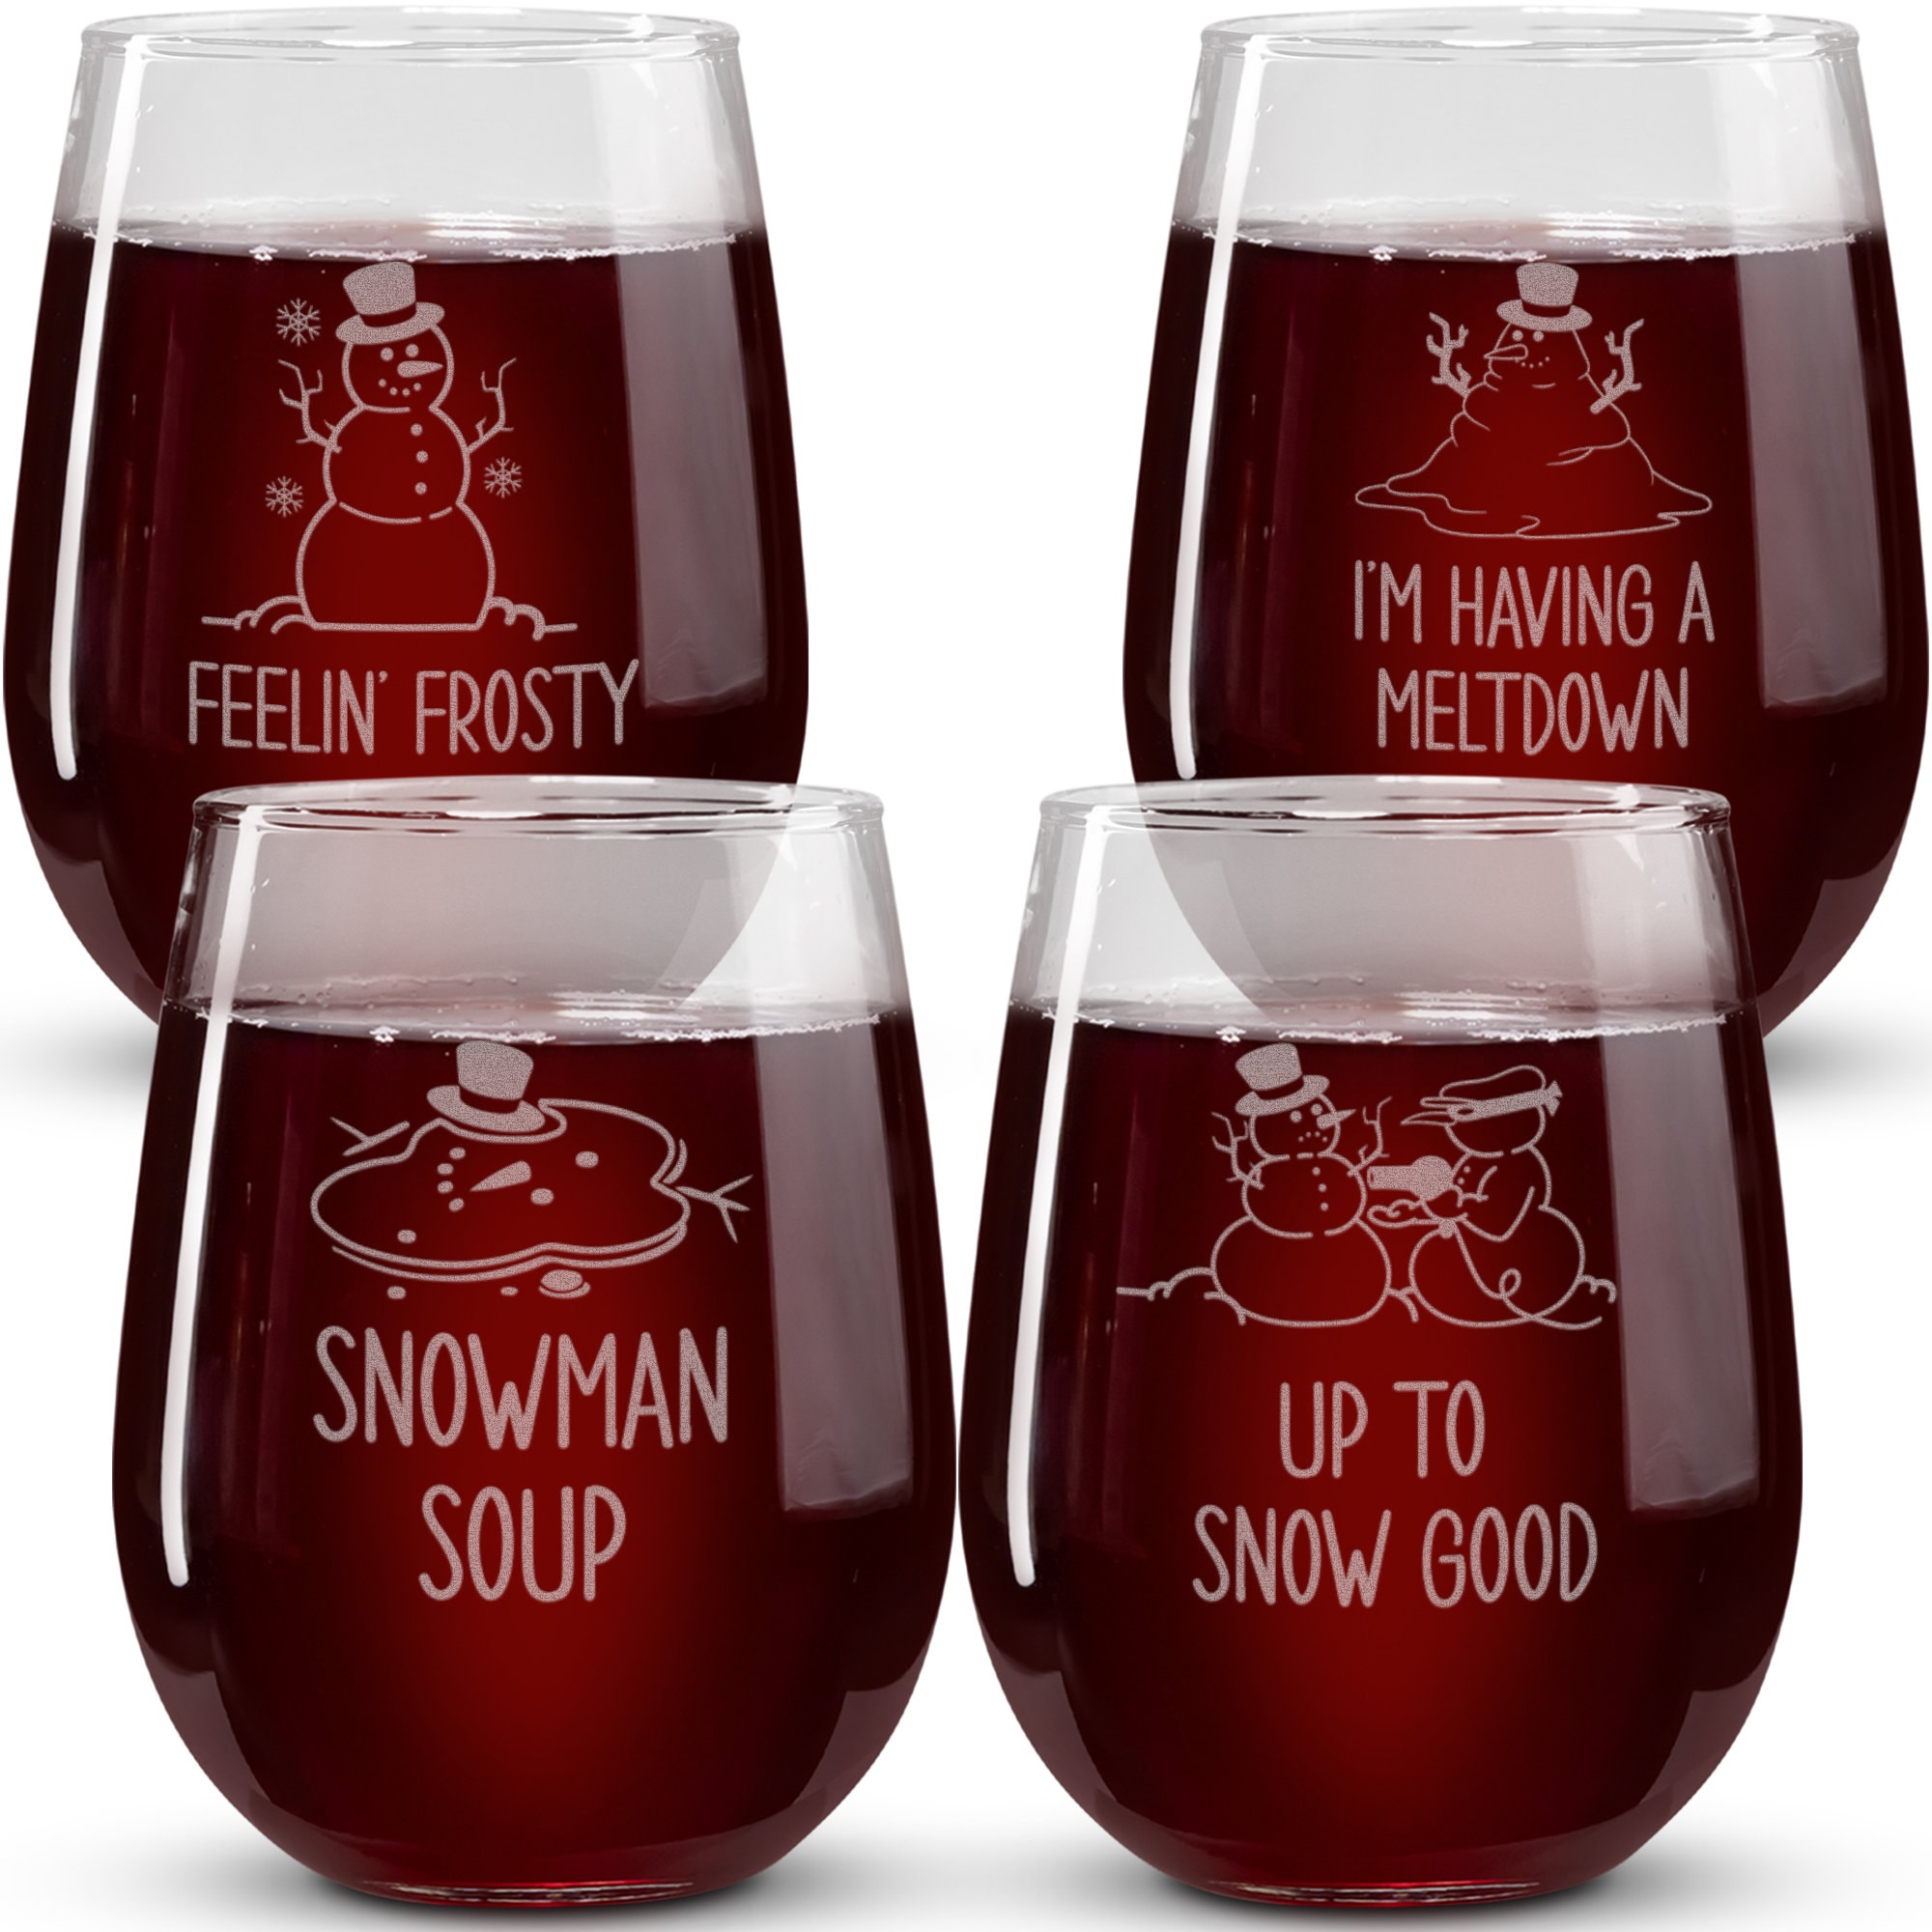 Set of 2 Merry Christmas Snowman Wine Glass, 15 Oz Christmas New Year Gift  Stemless Wine Glasses for…See more Set of 2 Merry Christmas Snowman Wine